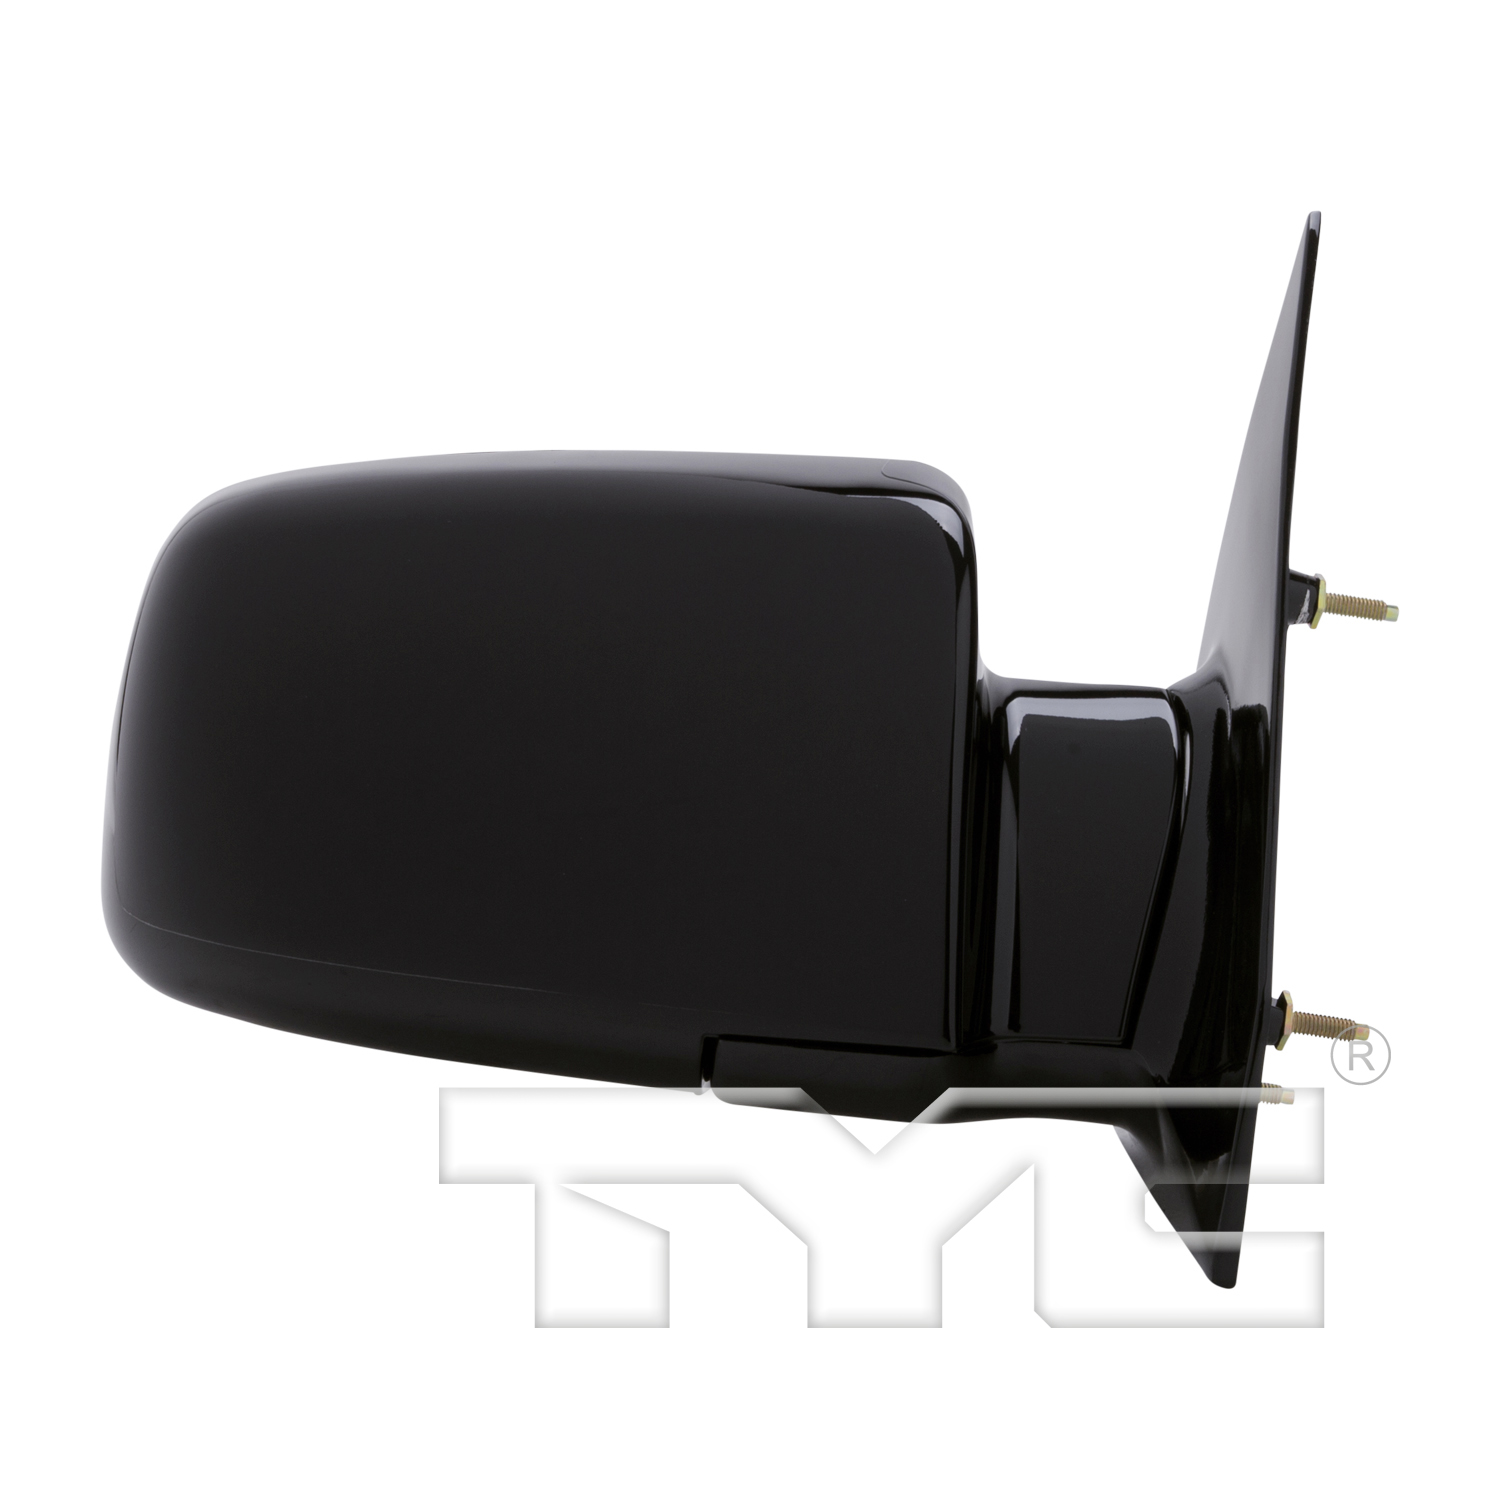 Aftermarket MIRRORS for CHEVROLET - ASTRO, ASTRO,88-05,RT Mirror outside rear view